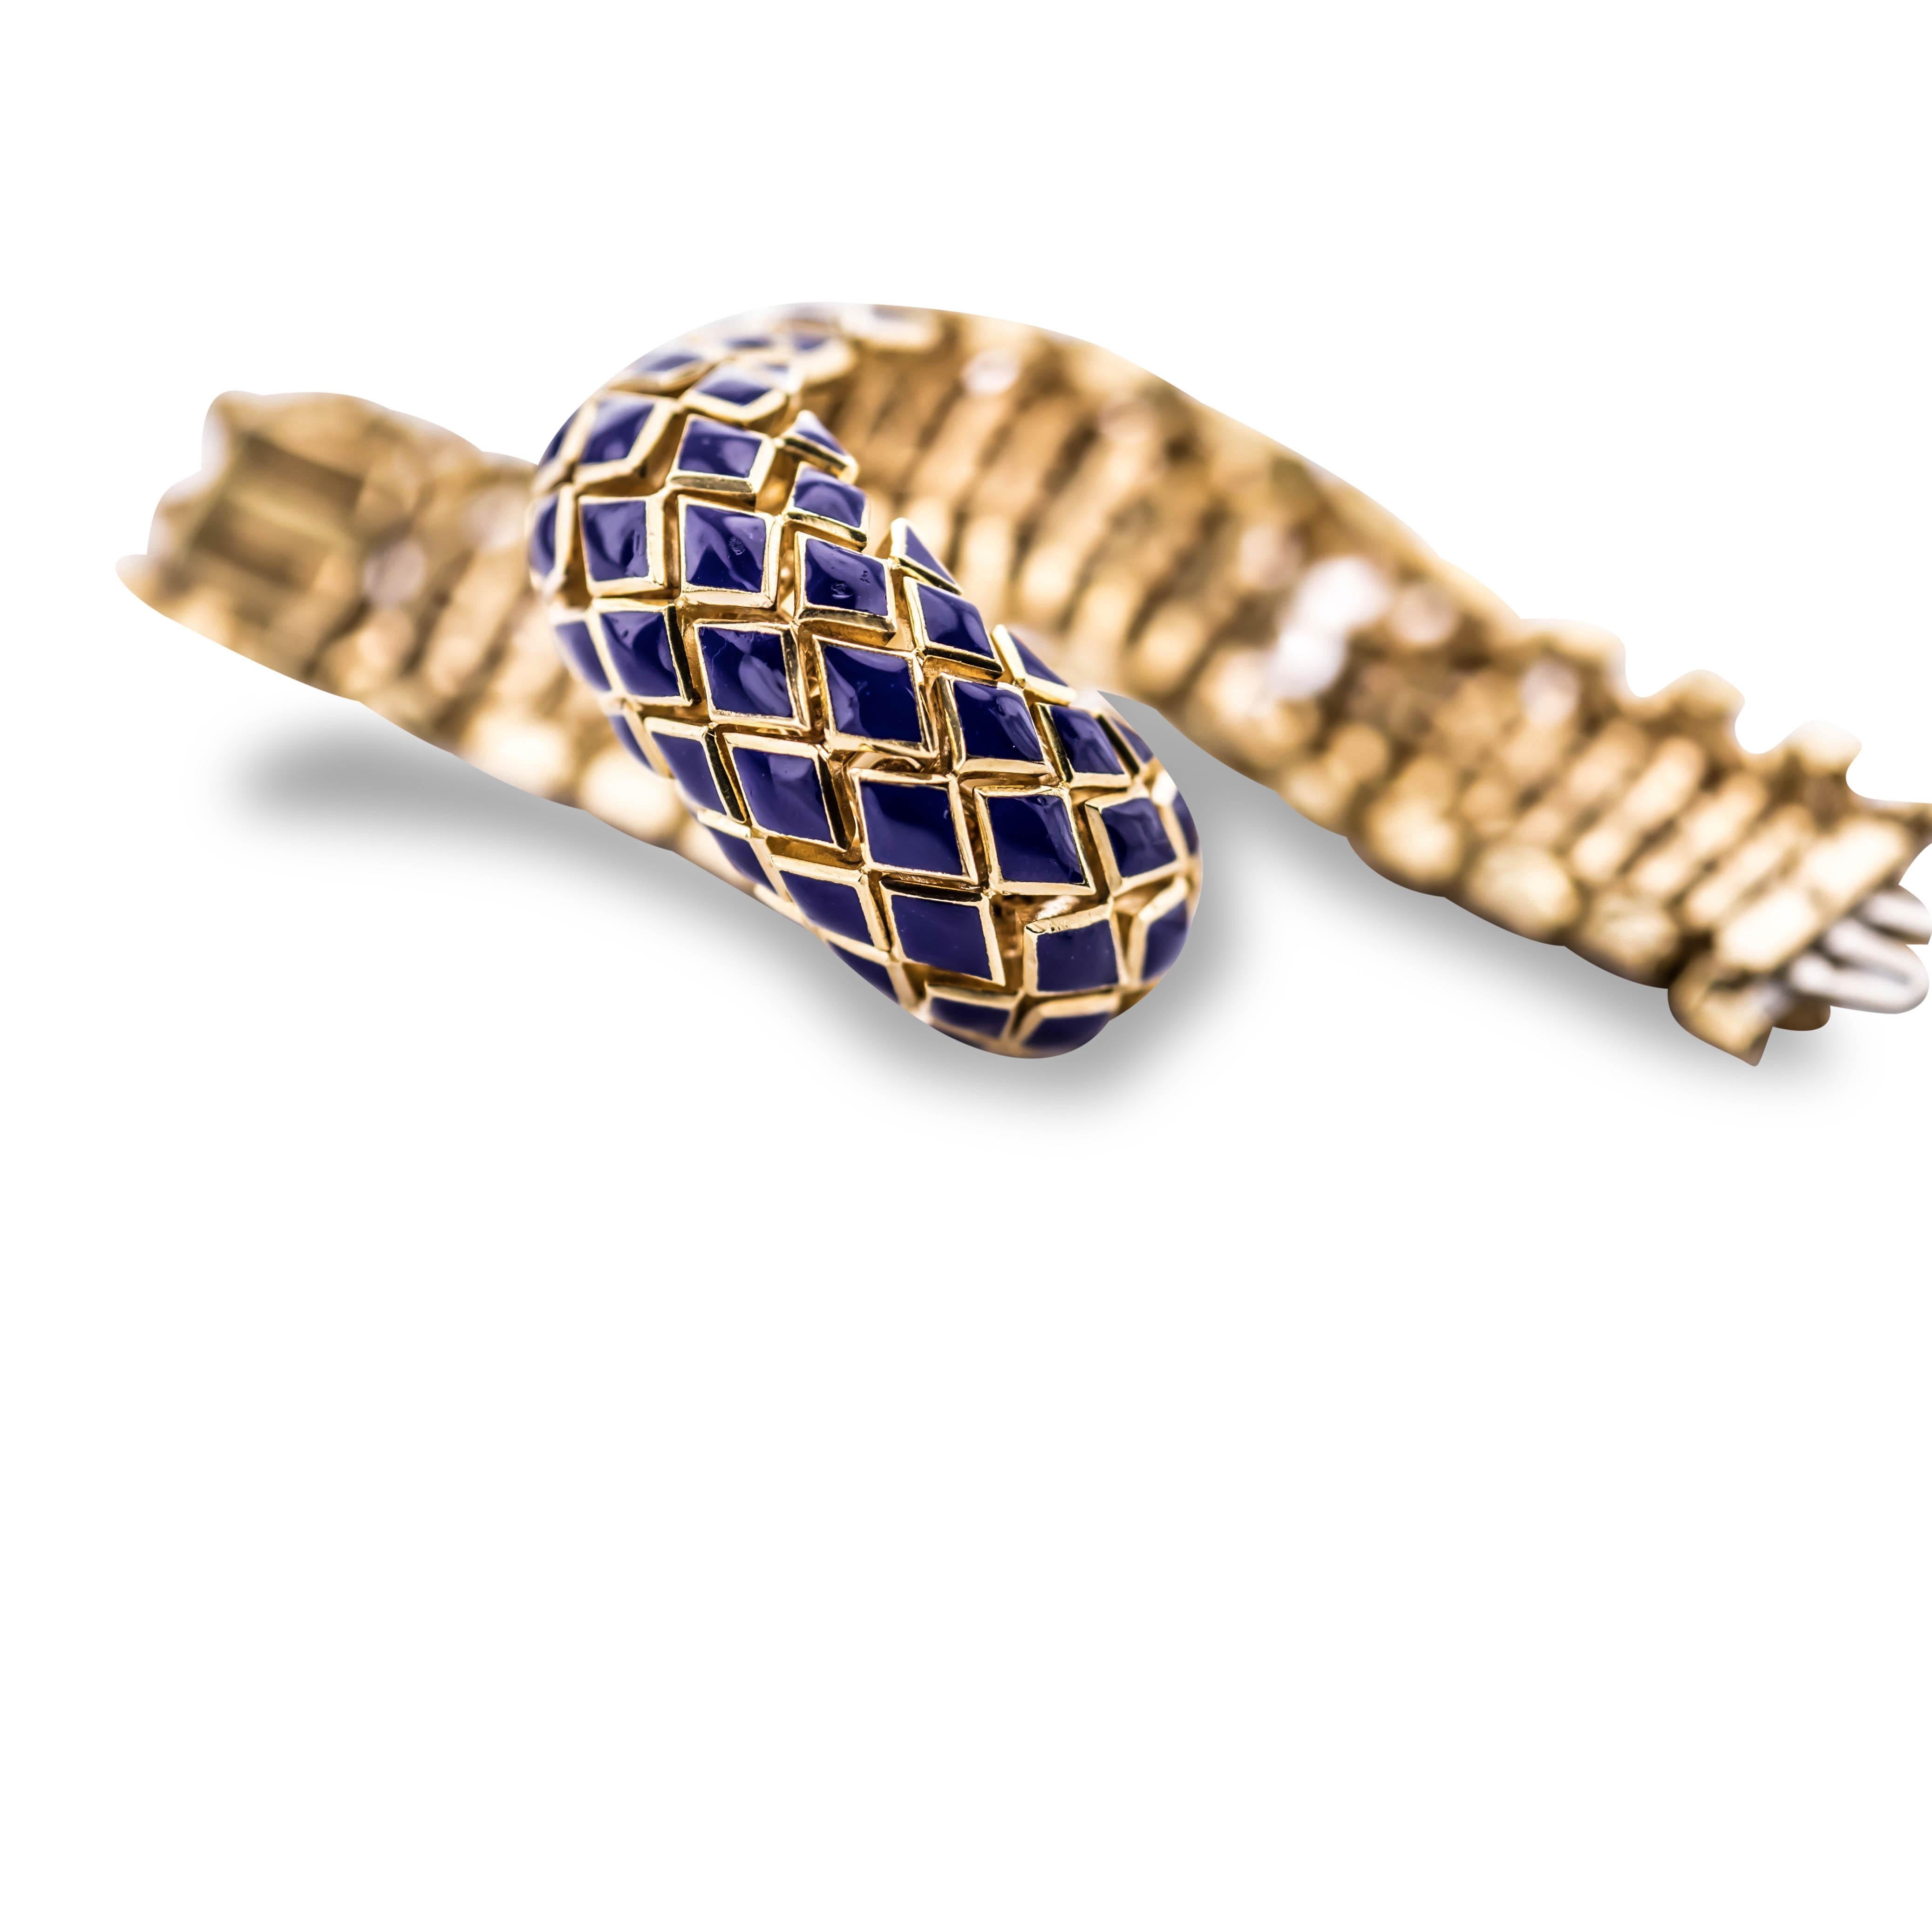 Since 1948 David Webb has carried forward a rich tradition of design, craftsmanship and creativity as an iconic American Jewelry House
18K yellow gold
Blue enamel
103 grams